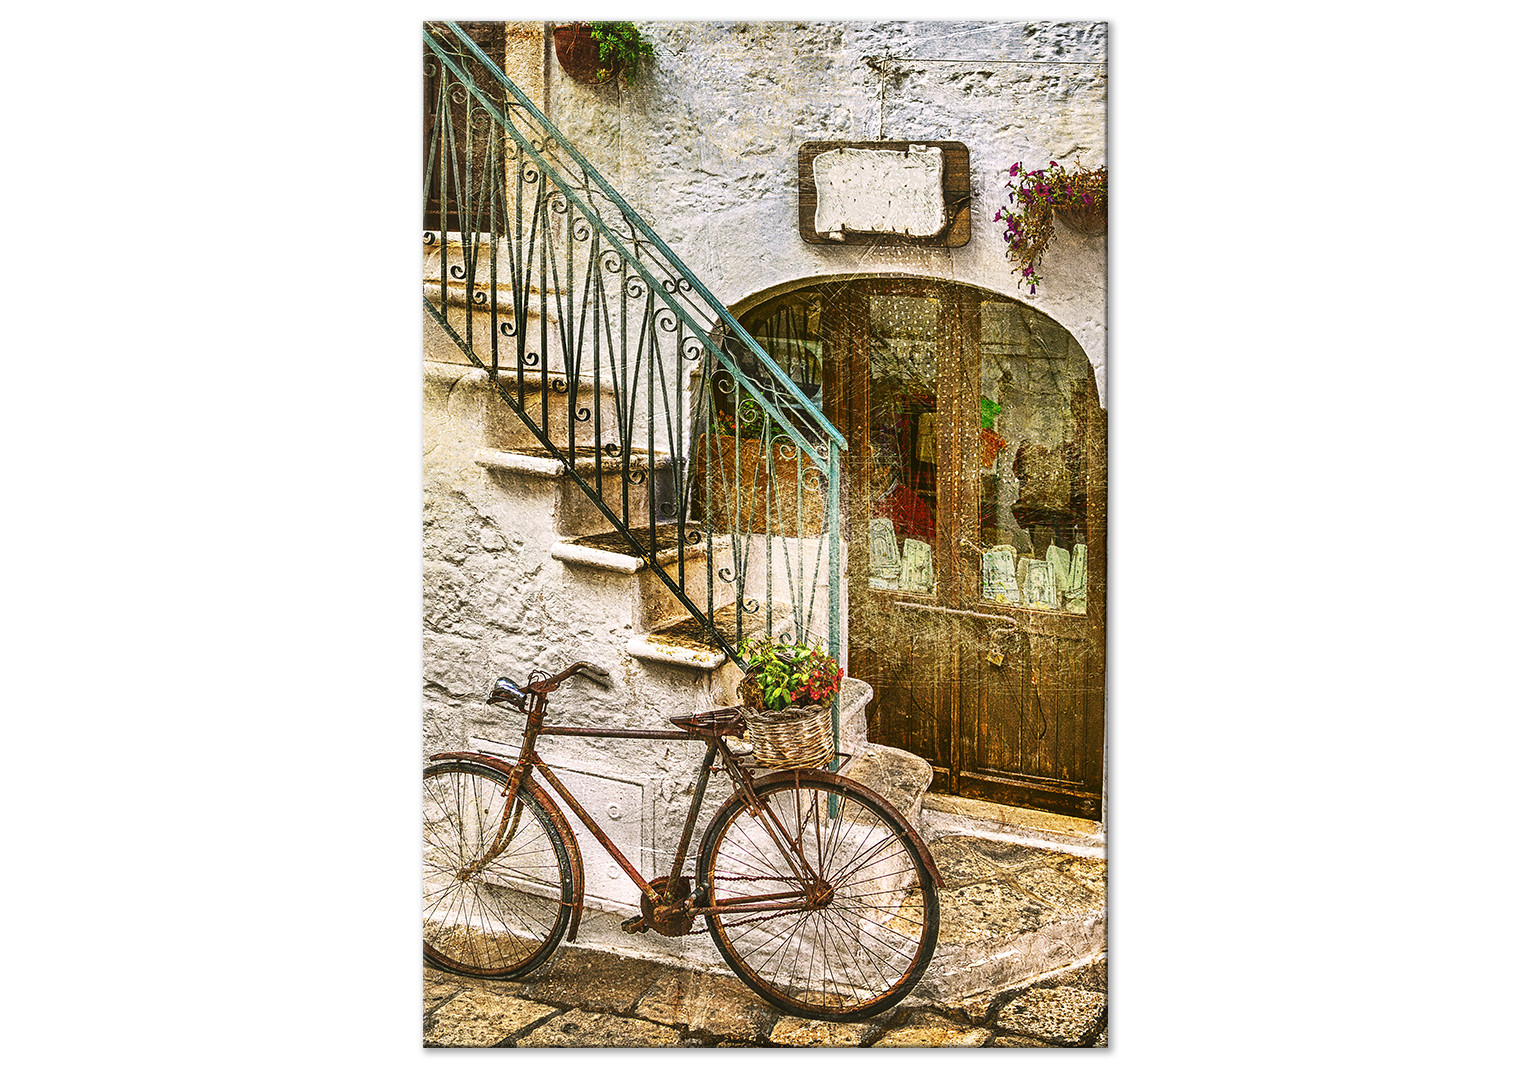 Art Work Bike on the stone stairs - photography of the Italian town - Vintage